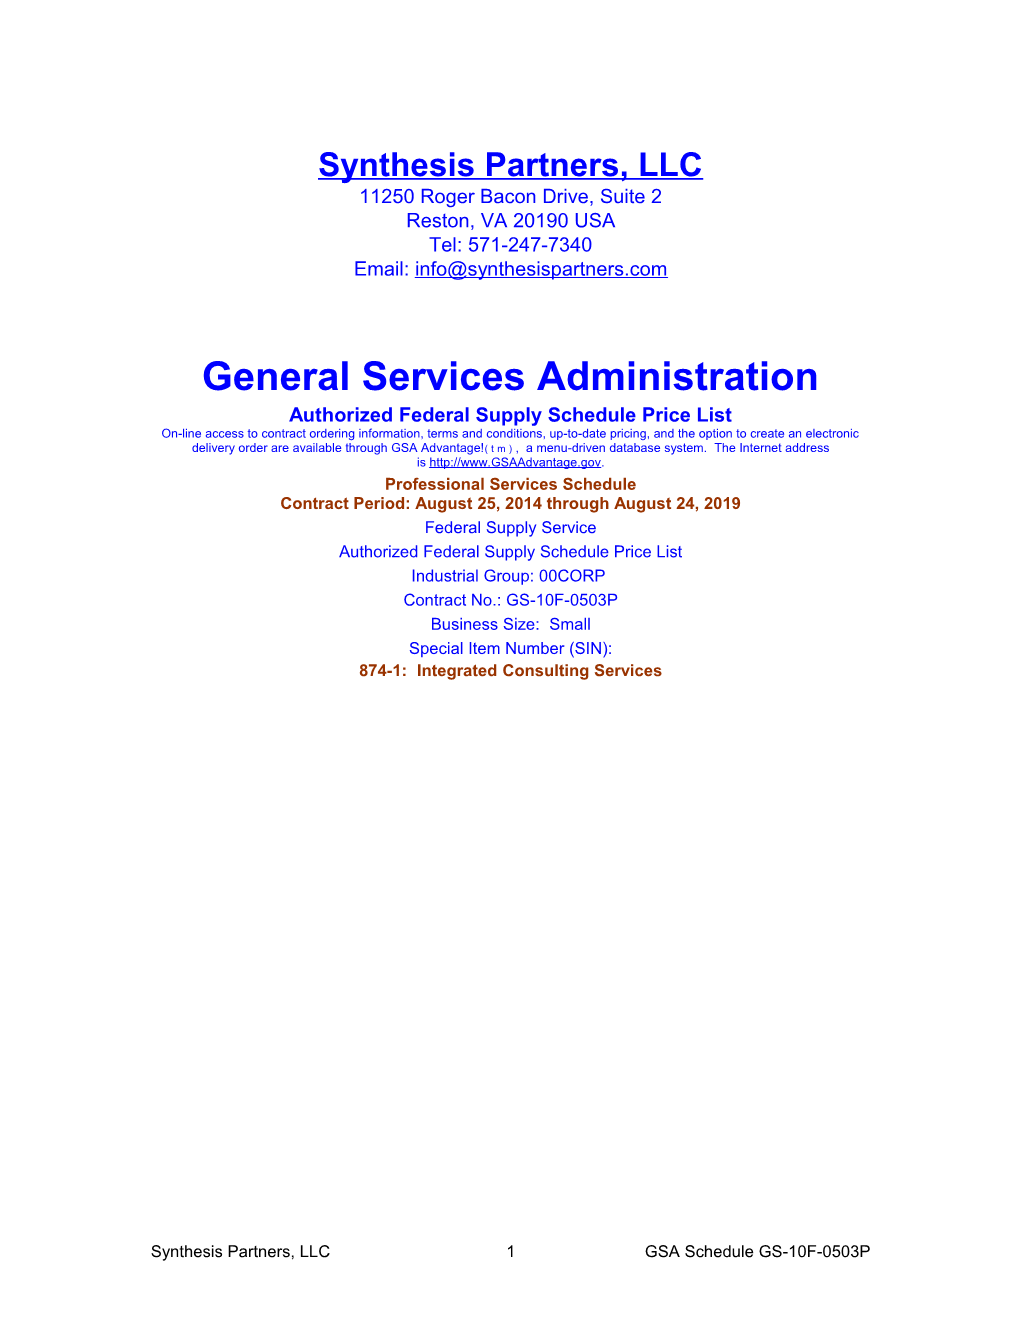 Authorized Federal Supply Schedule Price List